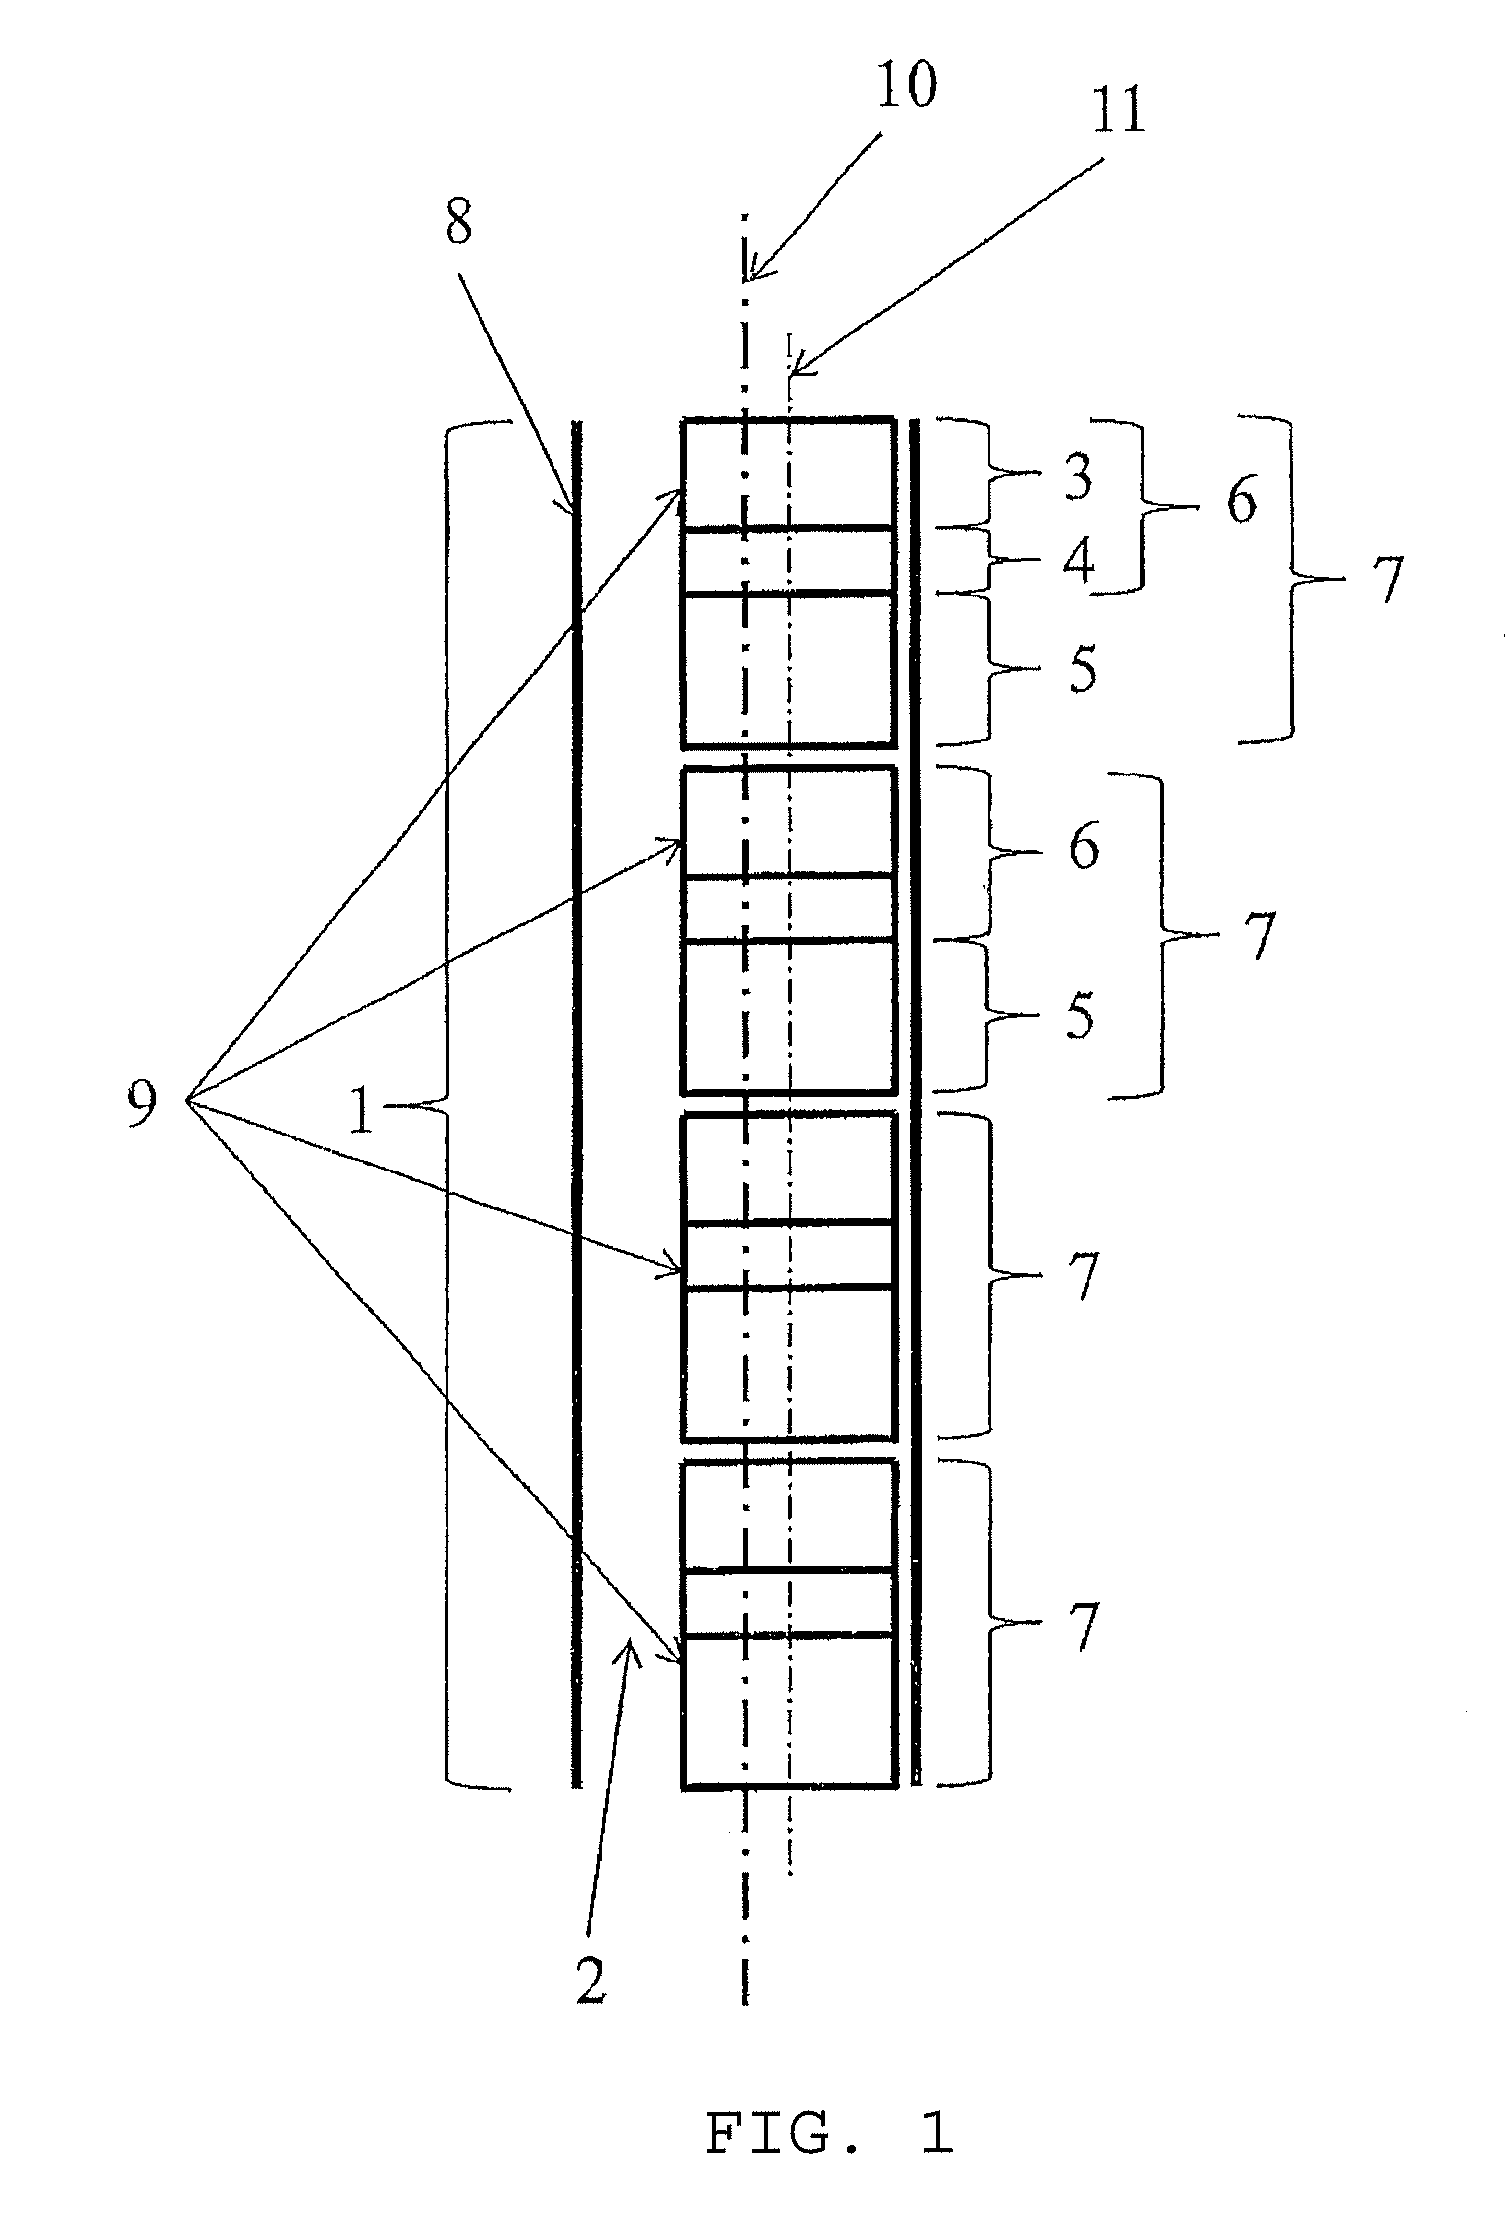 Submersible electrical well pump having nonconcentric housings